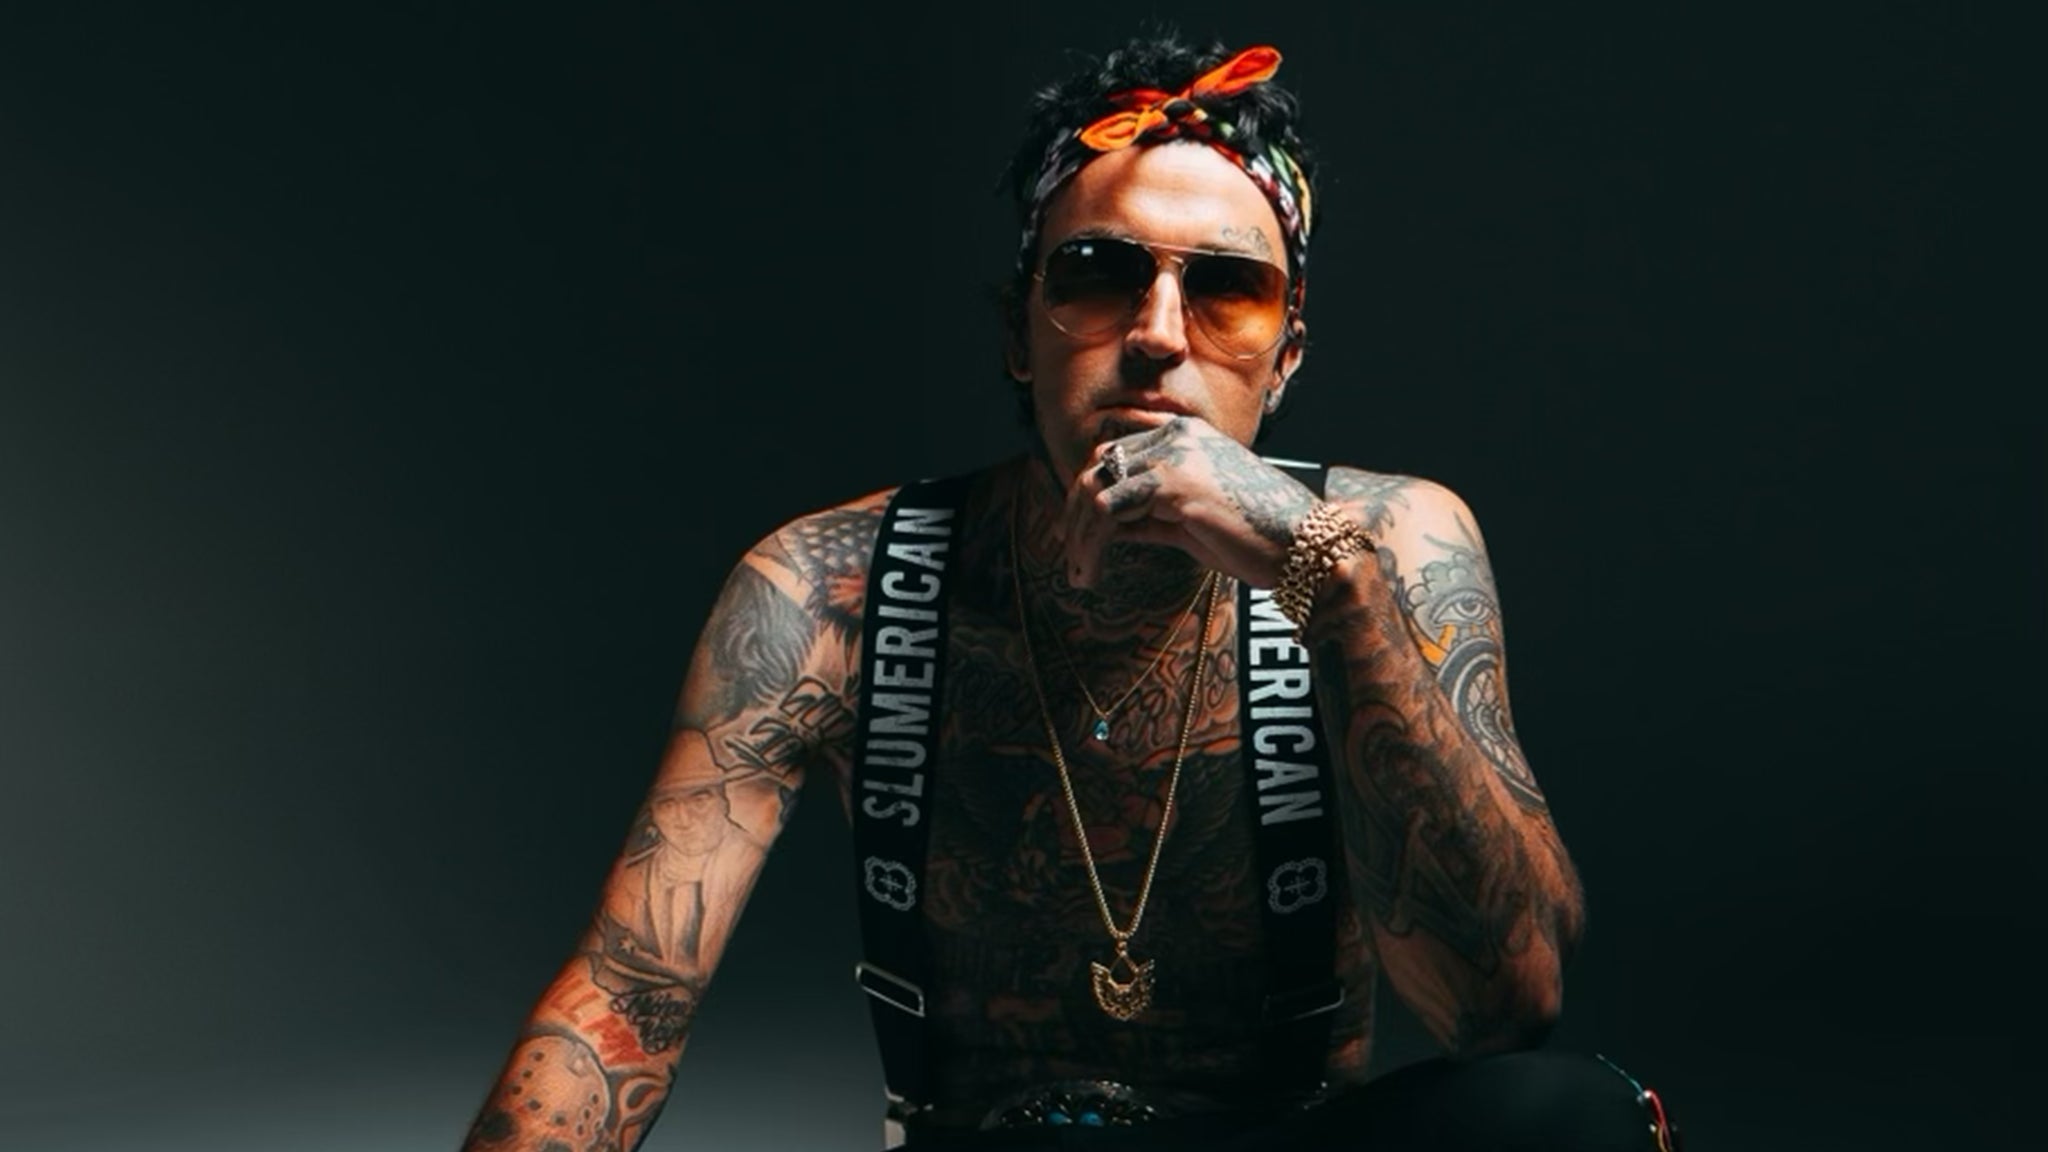 new presale password for Yelawolf face value tickets in Columbia at The Senate